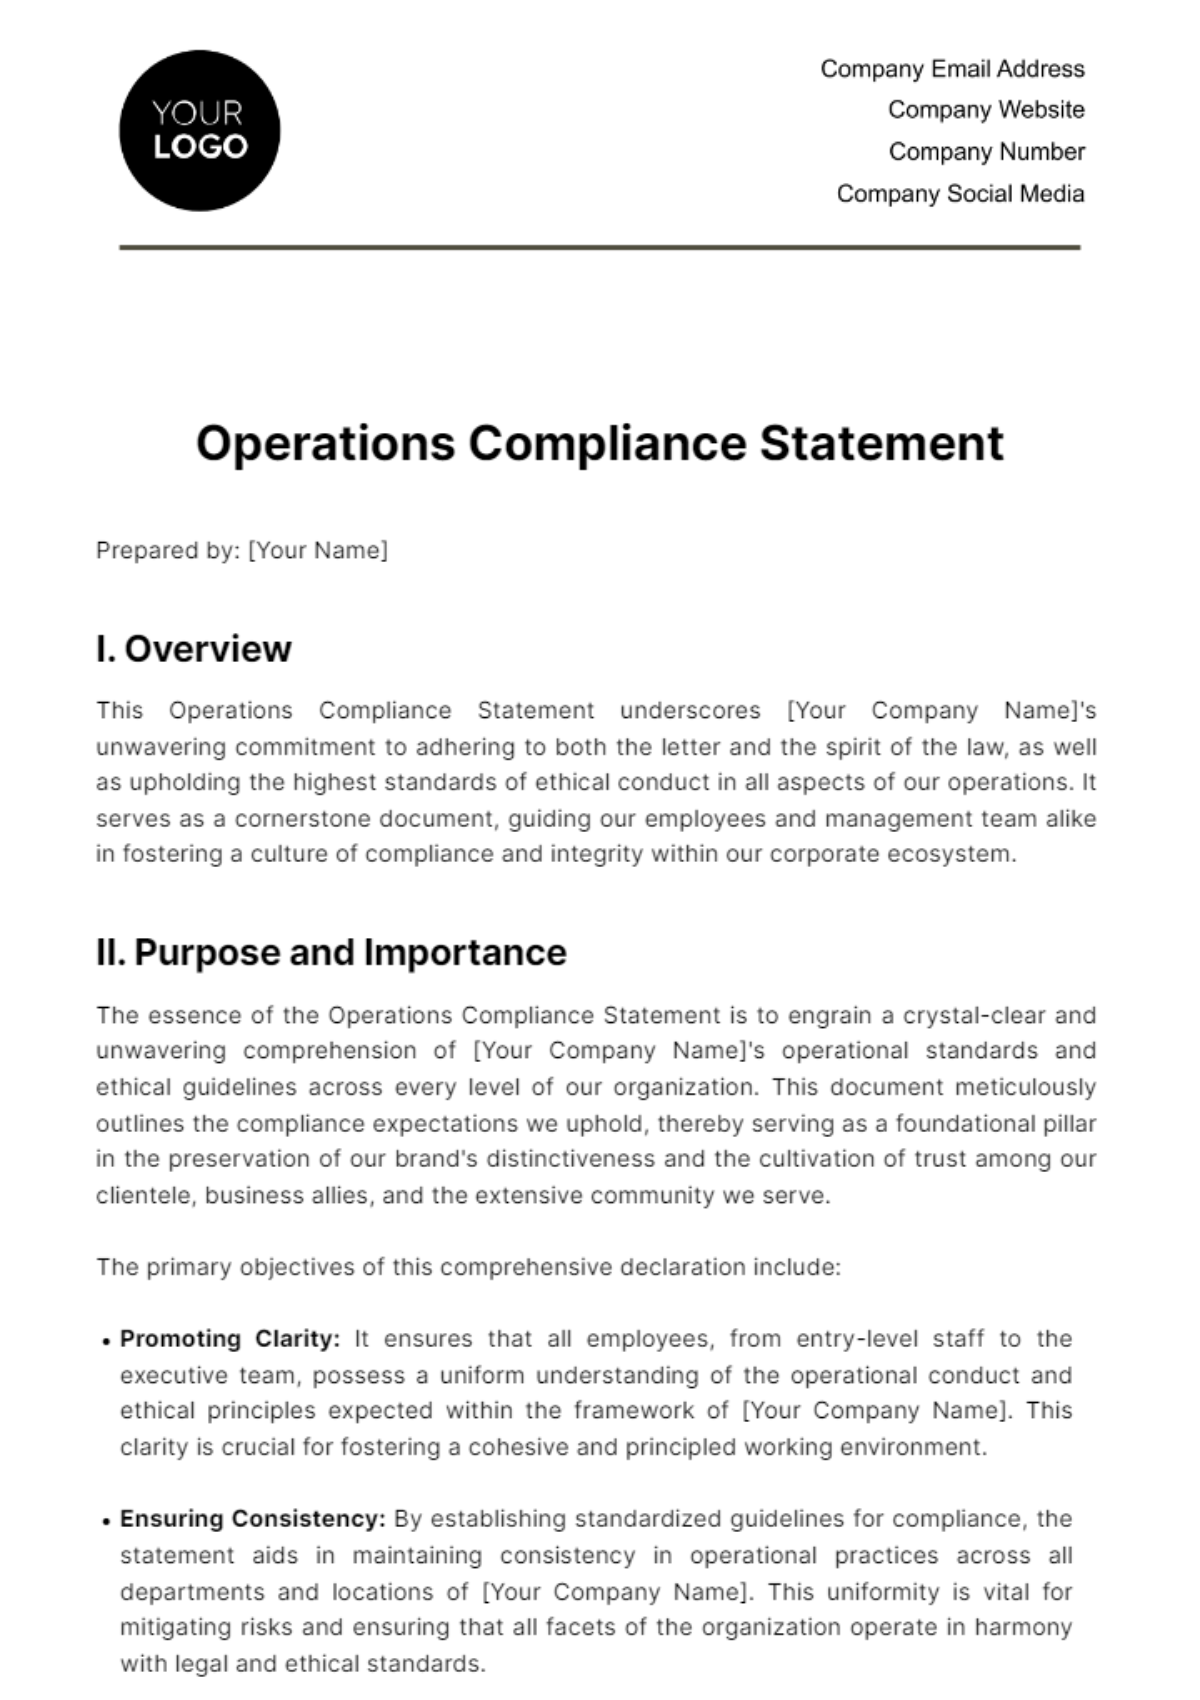 Operations Compliance Statement Template